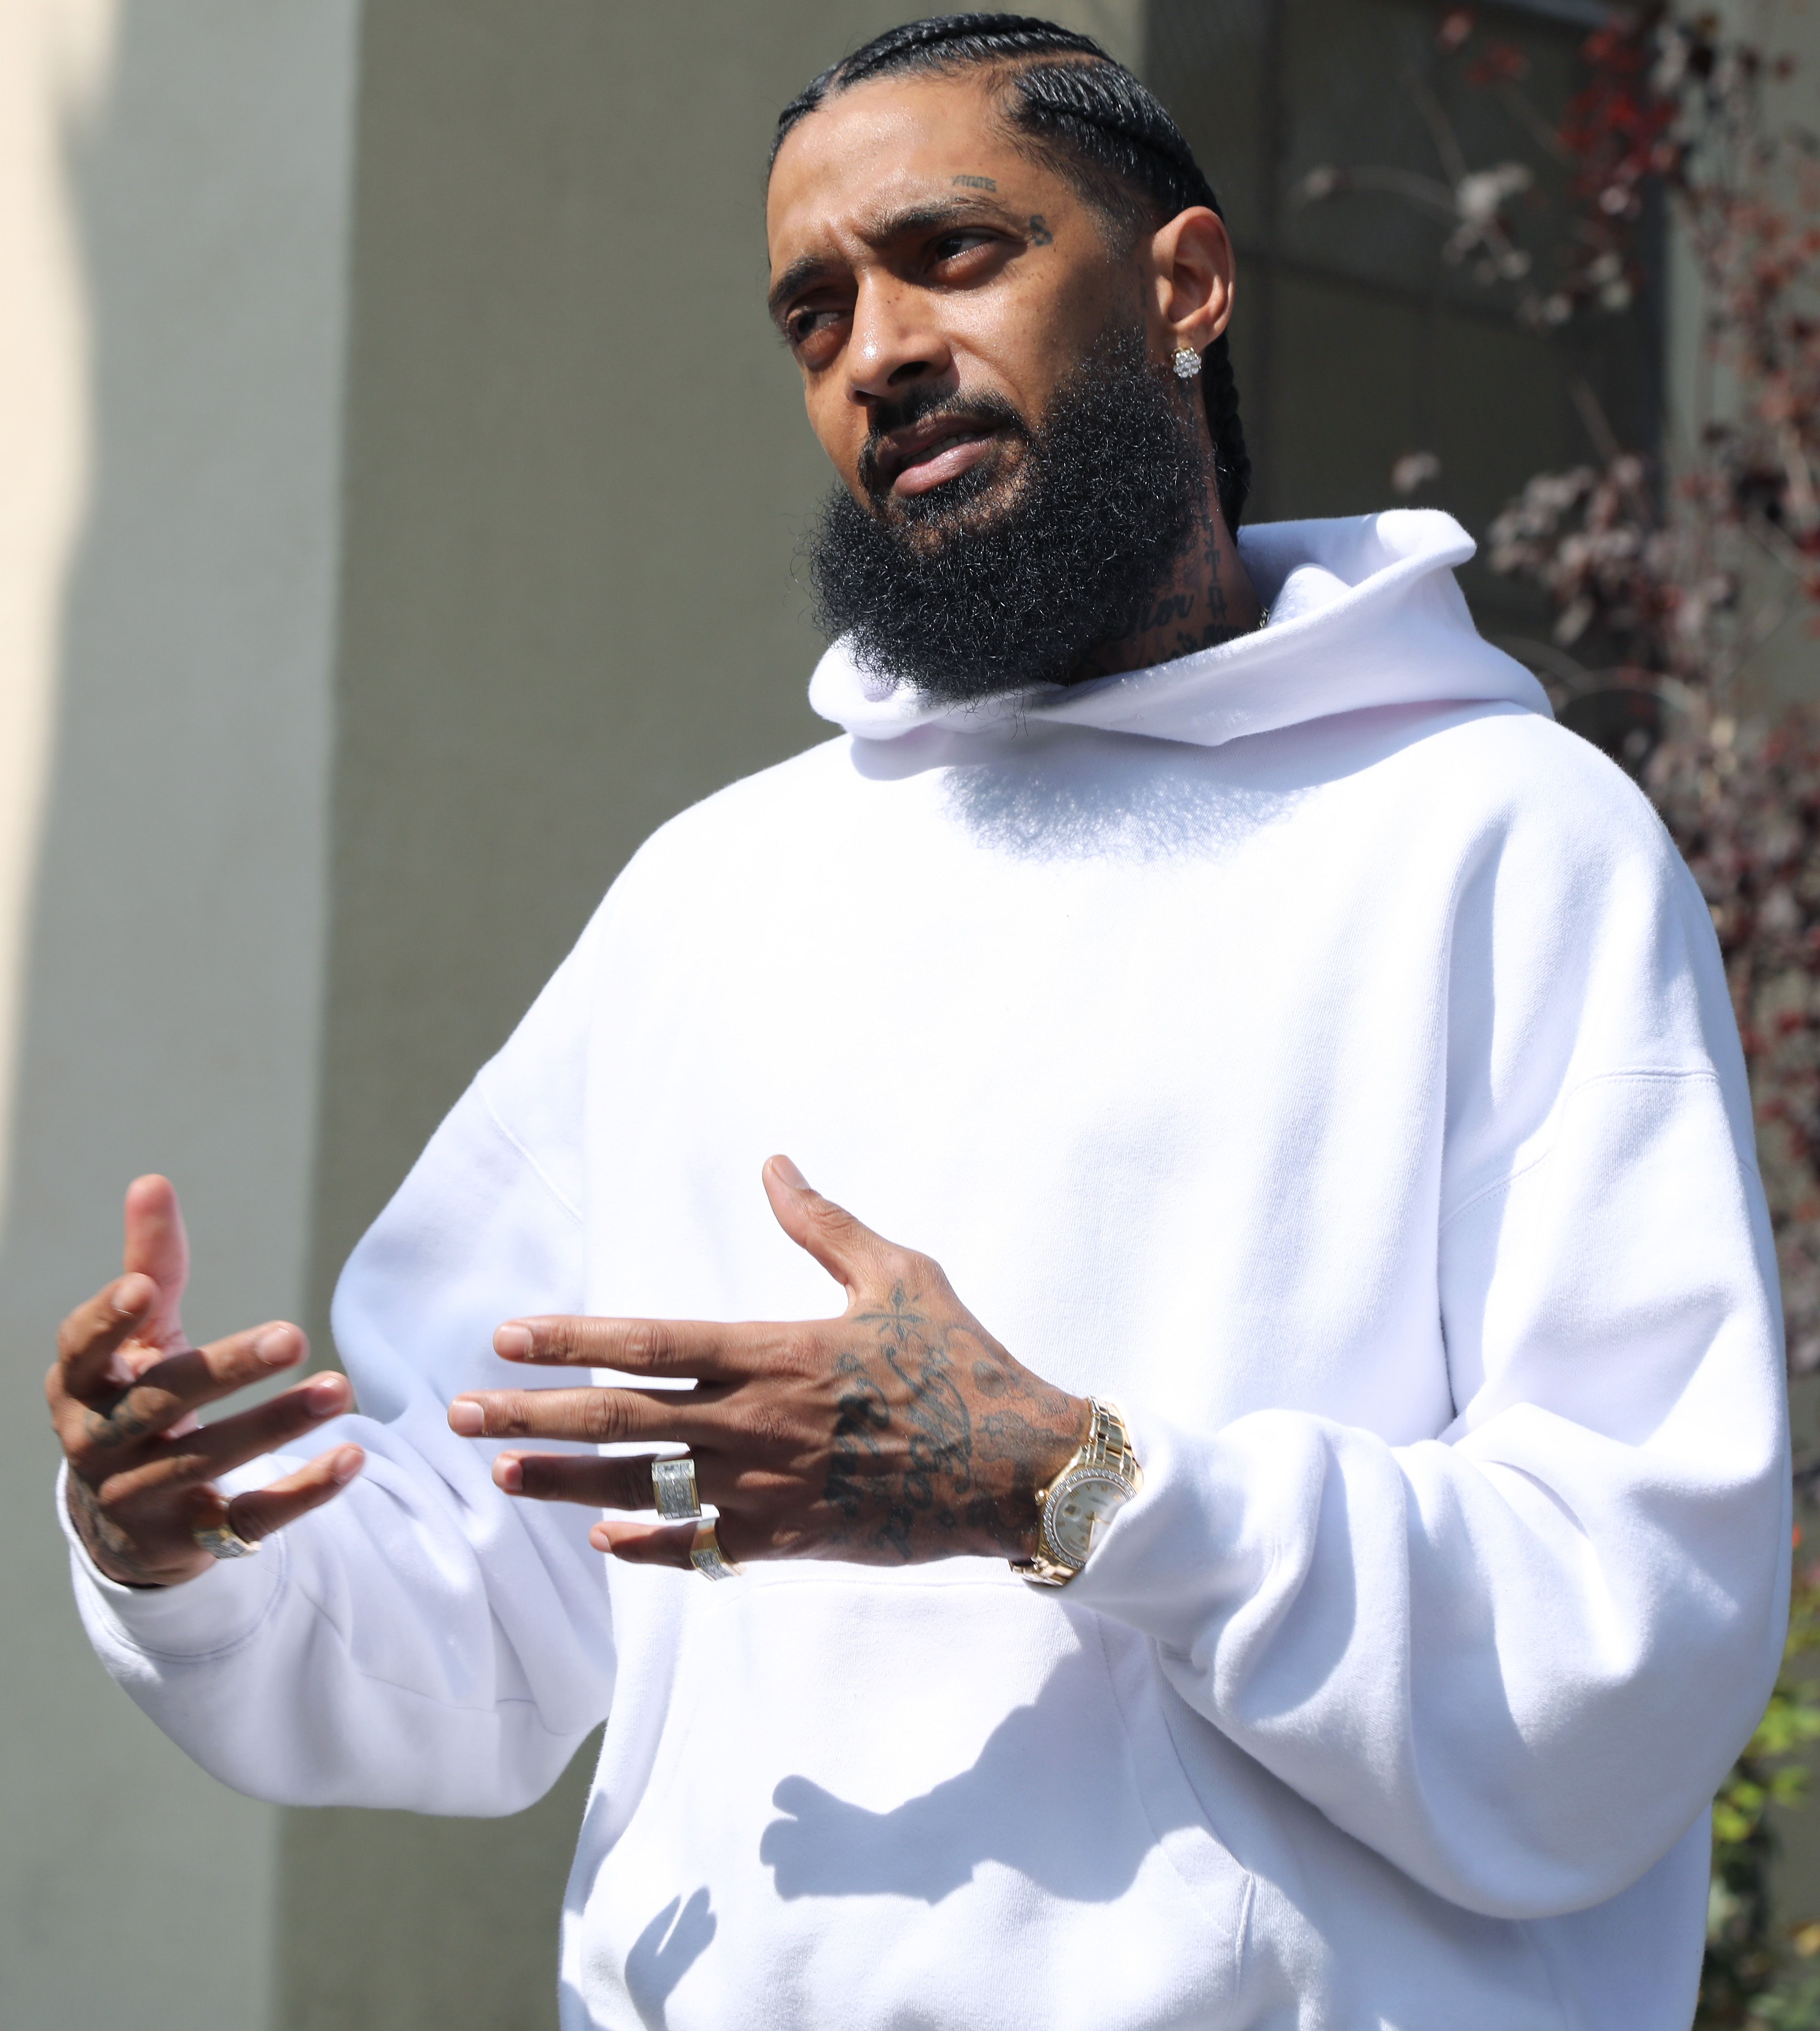 Nipsey Hussle attends Nipsey Hussle x PUMA Hoops Basketball Court Refurbishment Reveal Event on October 22, 2018 in Los Angeles, California. | Source: Getty Images